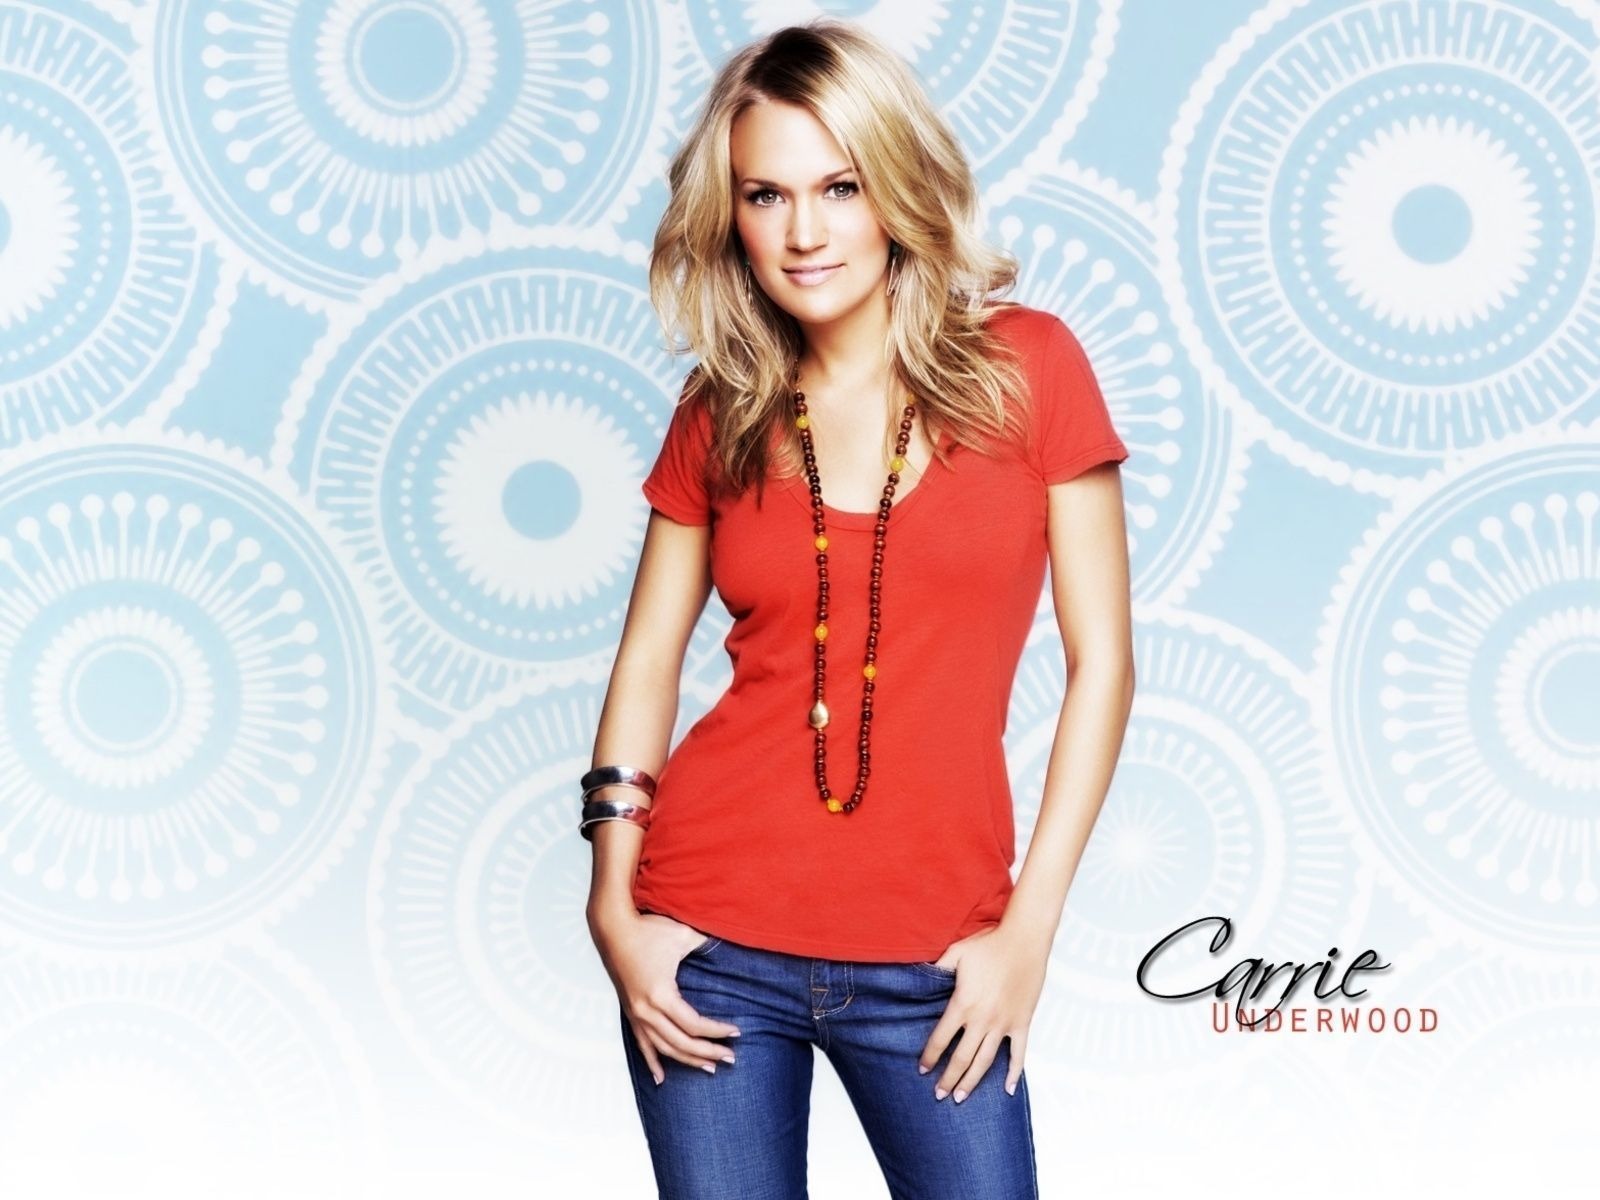 Carrie Underwood #006 - 1600x1200 Wallpapers Pictures Photos Images